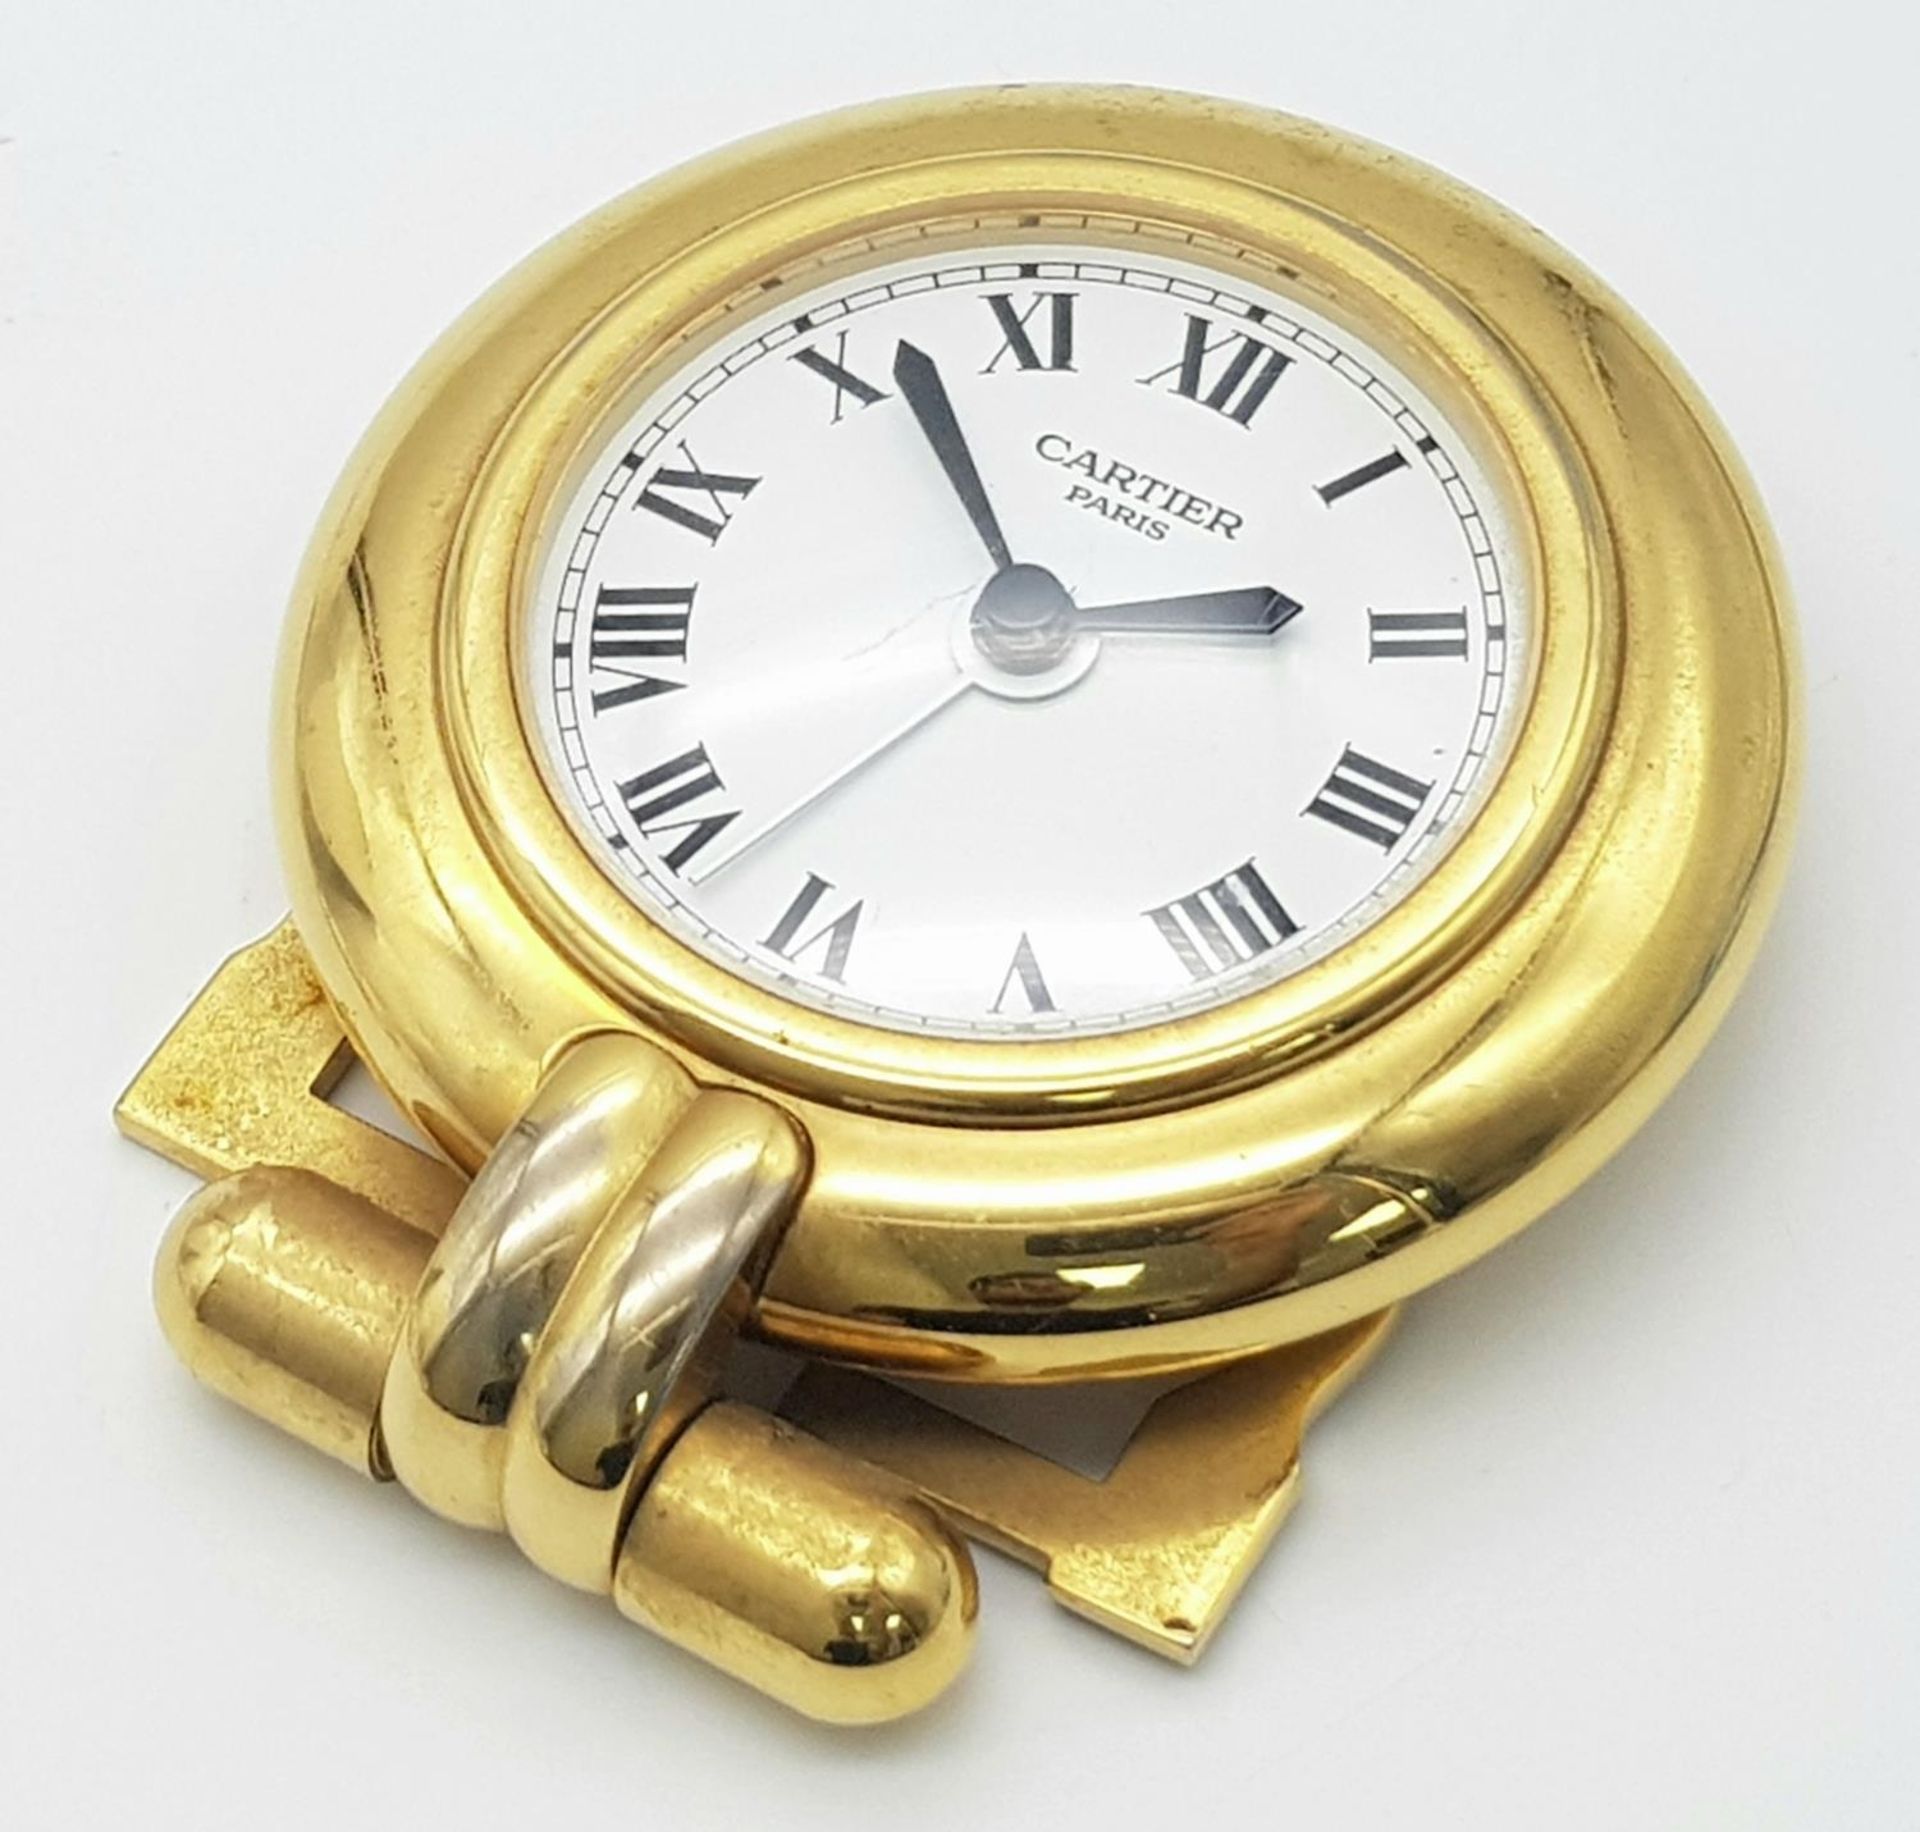 A Gold Plated Cartier Colisee Art Deco Travel Desk Clock. White dial with Roman numerals. 78mm - Image 2 of 8